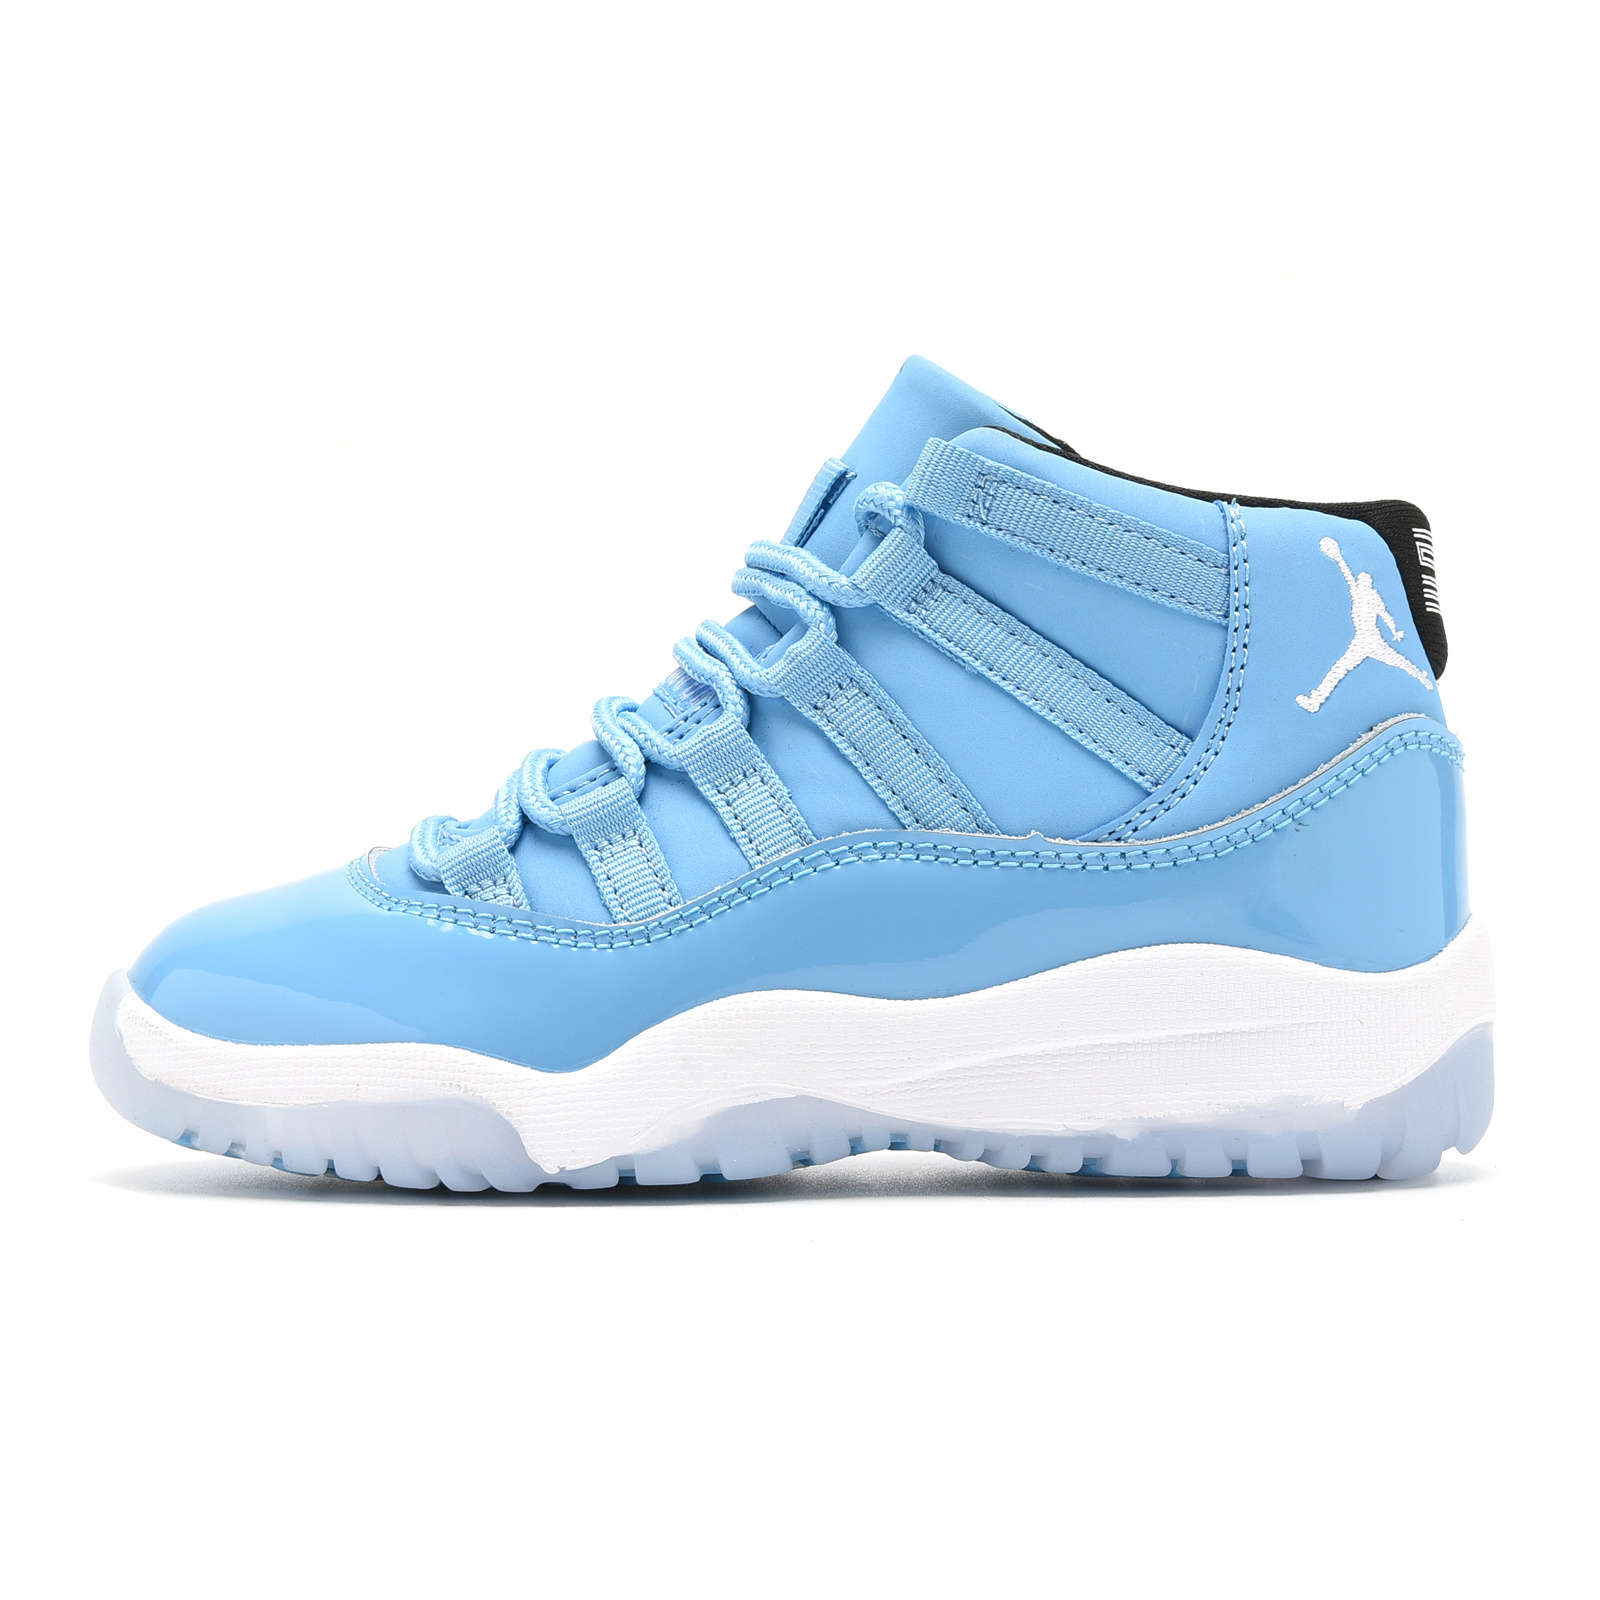 Youth Running Weapon Air Jordan 11 Blue Shoes 039